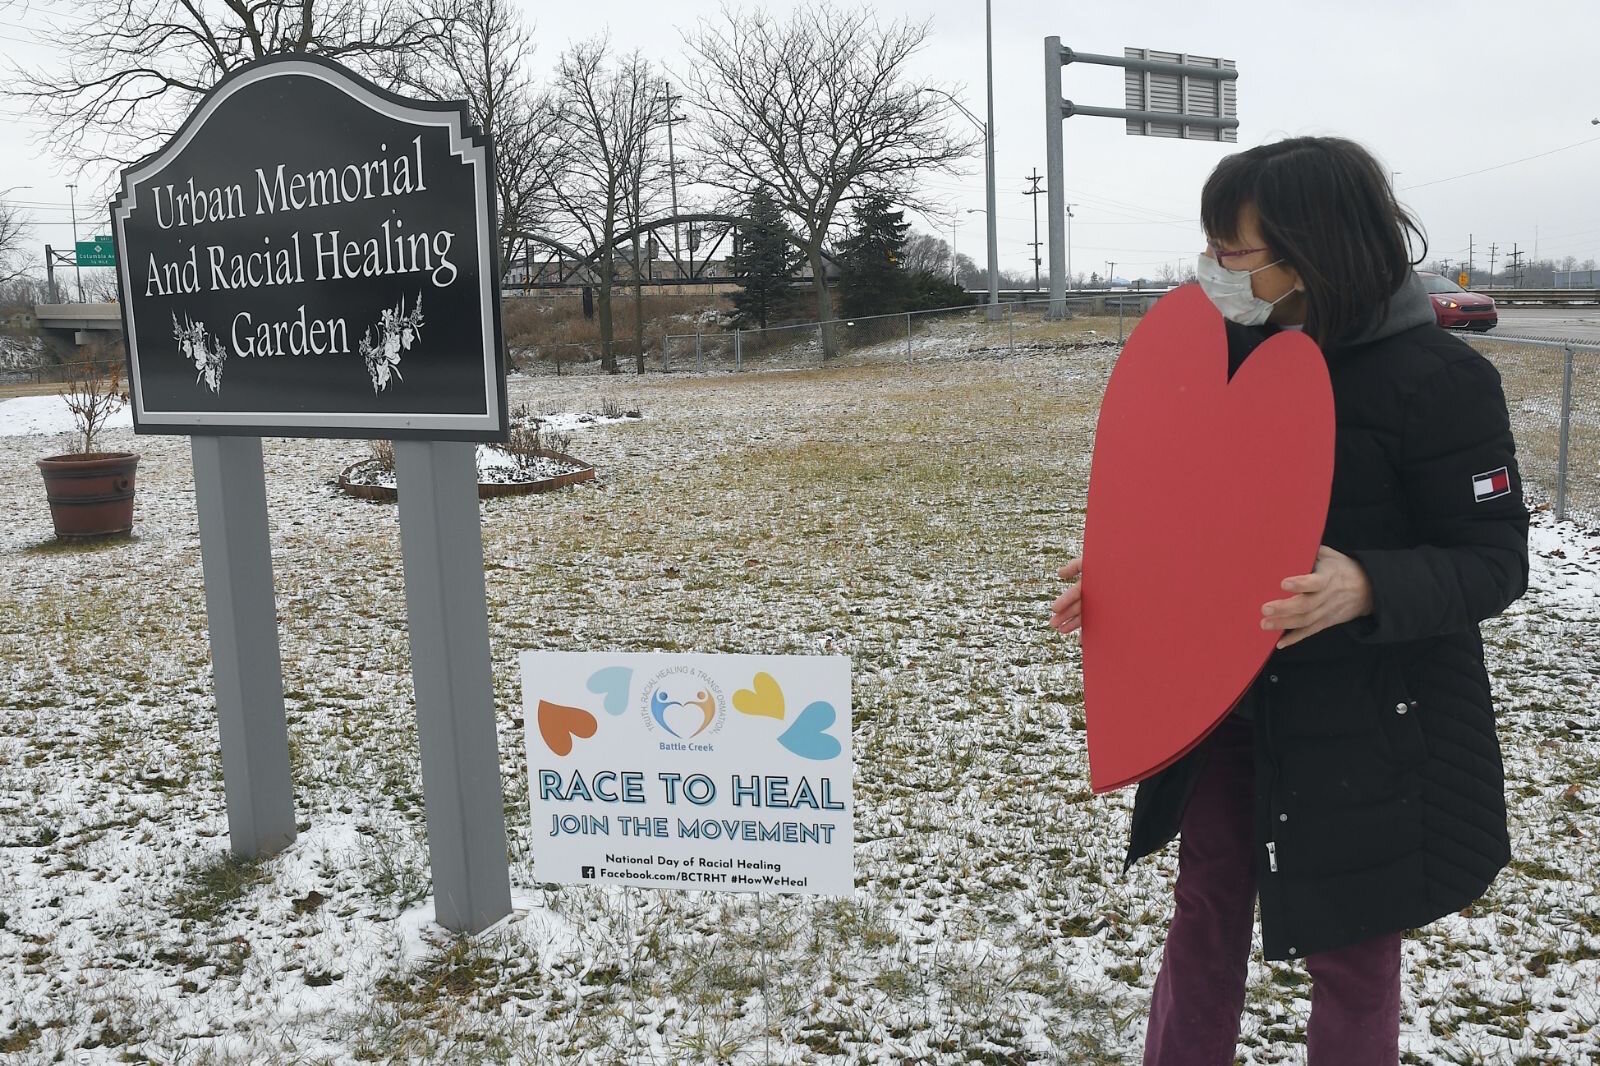 Kathy Antaya has finished putting up a racial healing sign by the Urban Memorial and Racial Healing Garden in downtown Battle Creek.